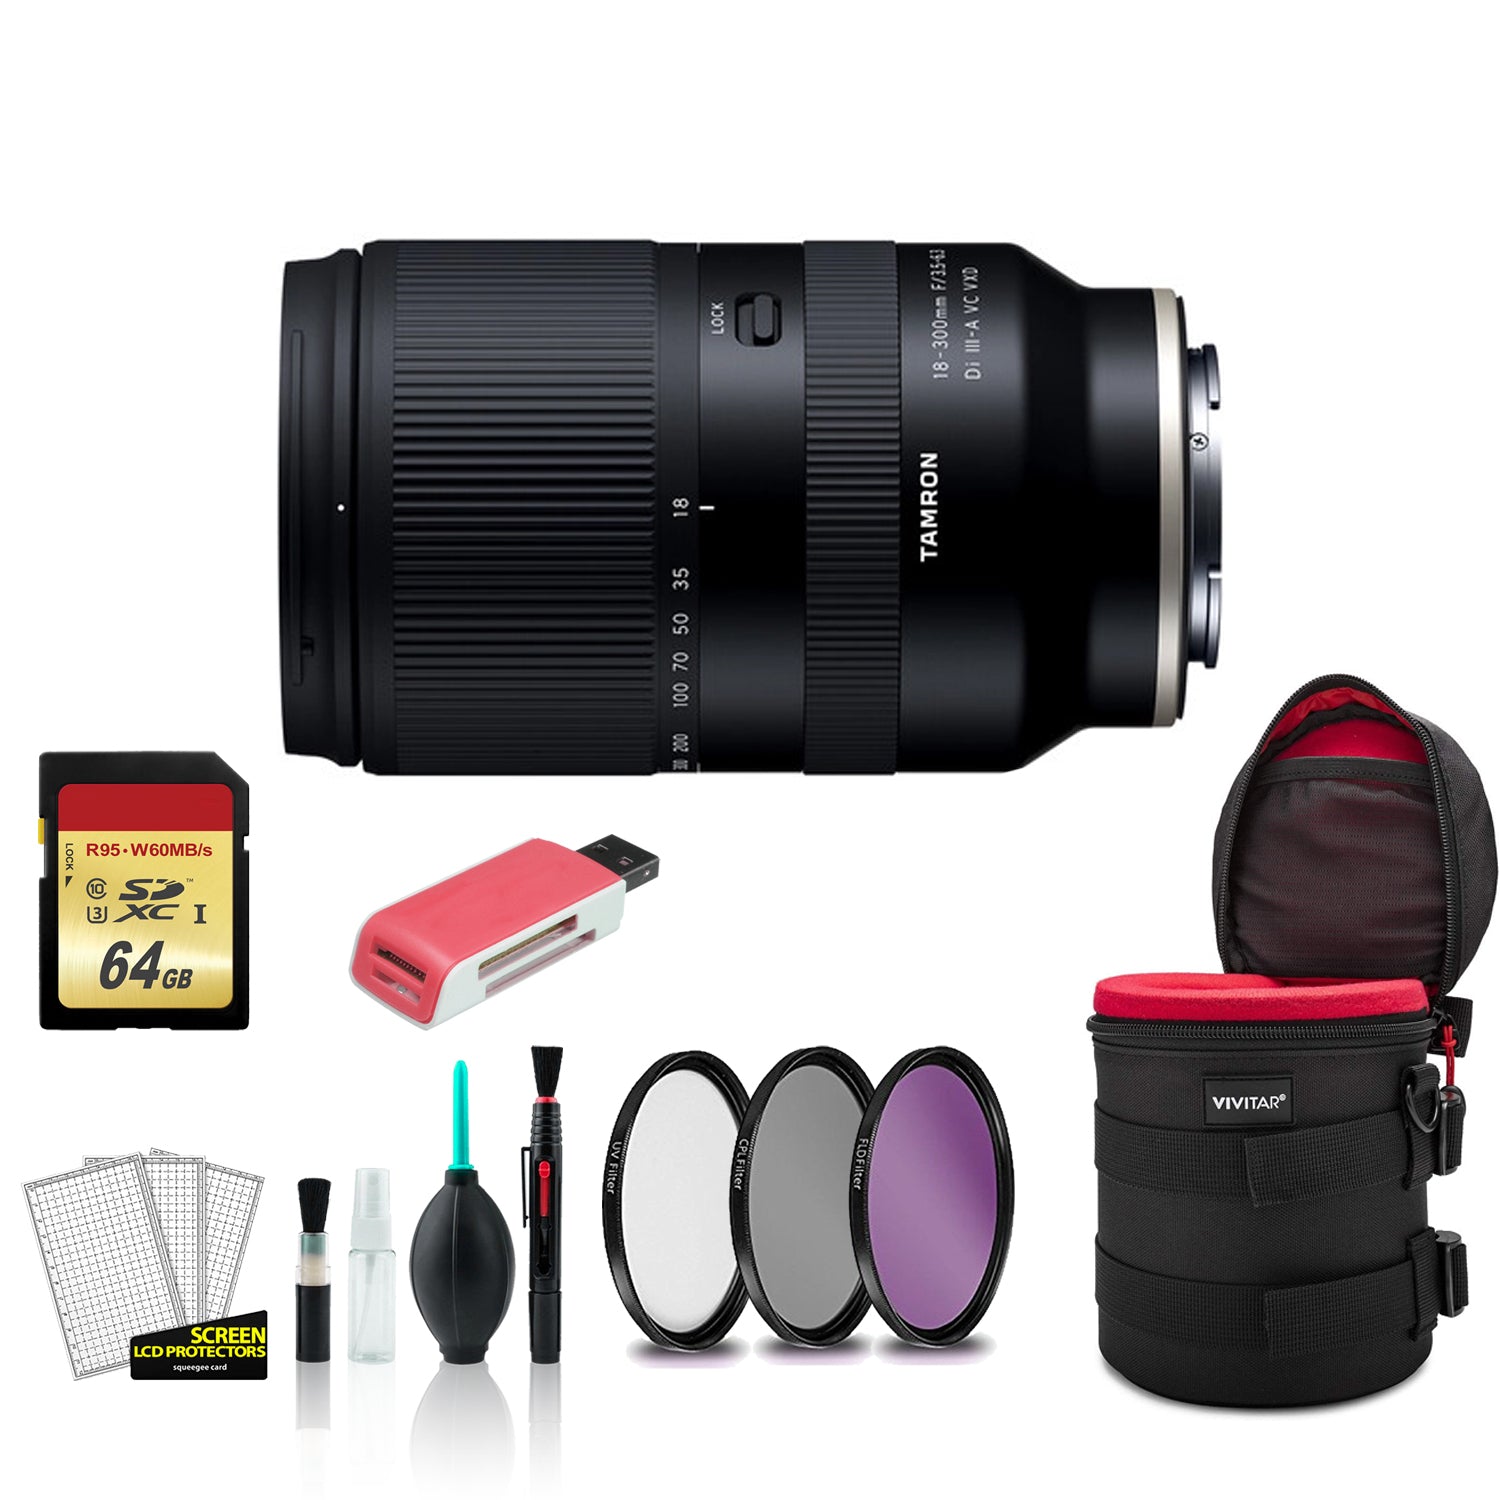 Tamron 18-300mm Lens for Sony E - Kit with 64GB Memory Card + More